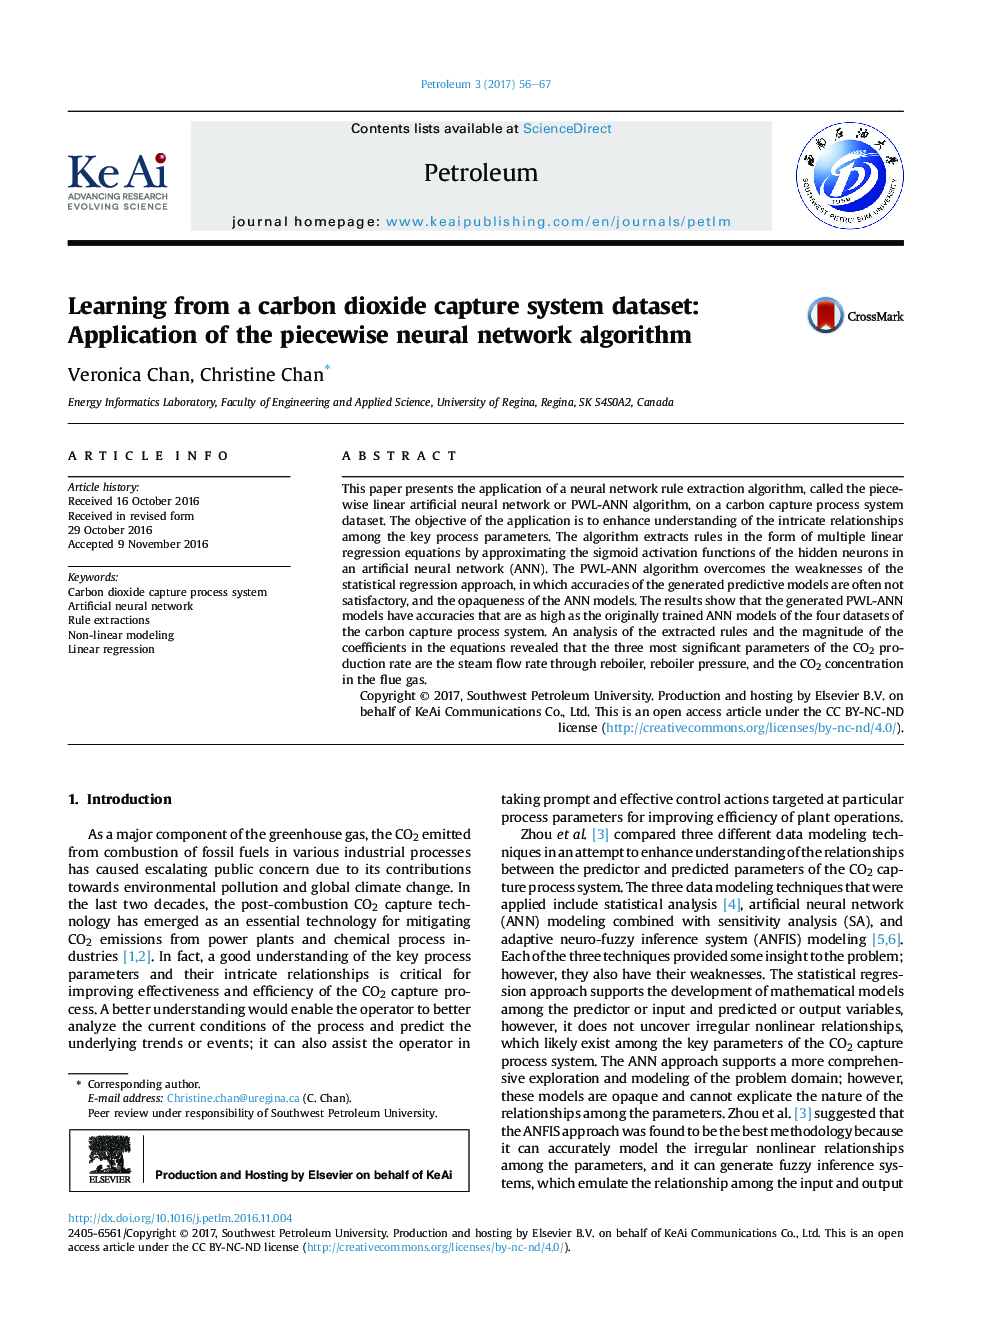 Learning from a carbon dioxide capture system dataset: Application of the piecewise neural network algorithm